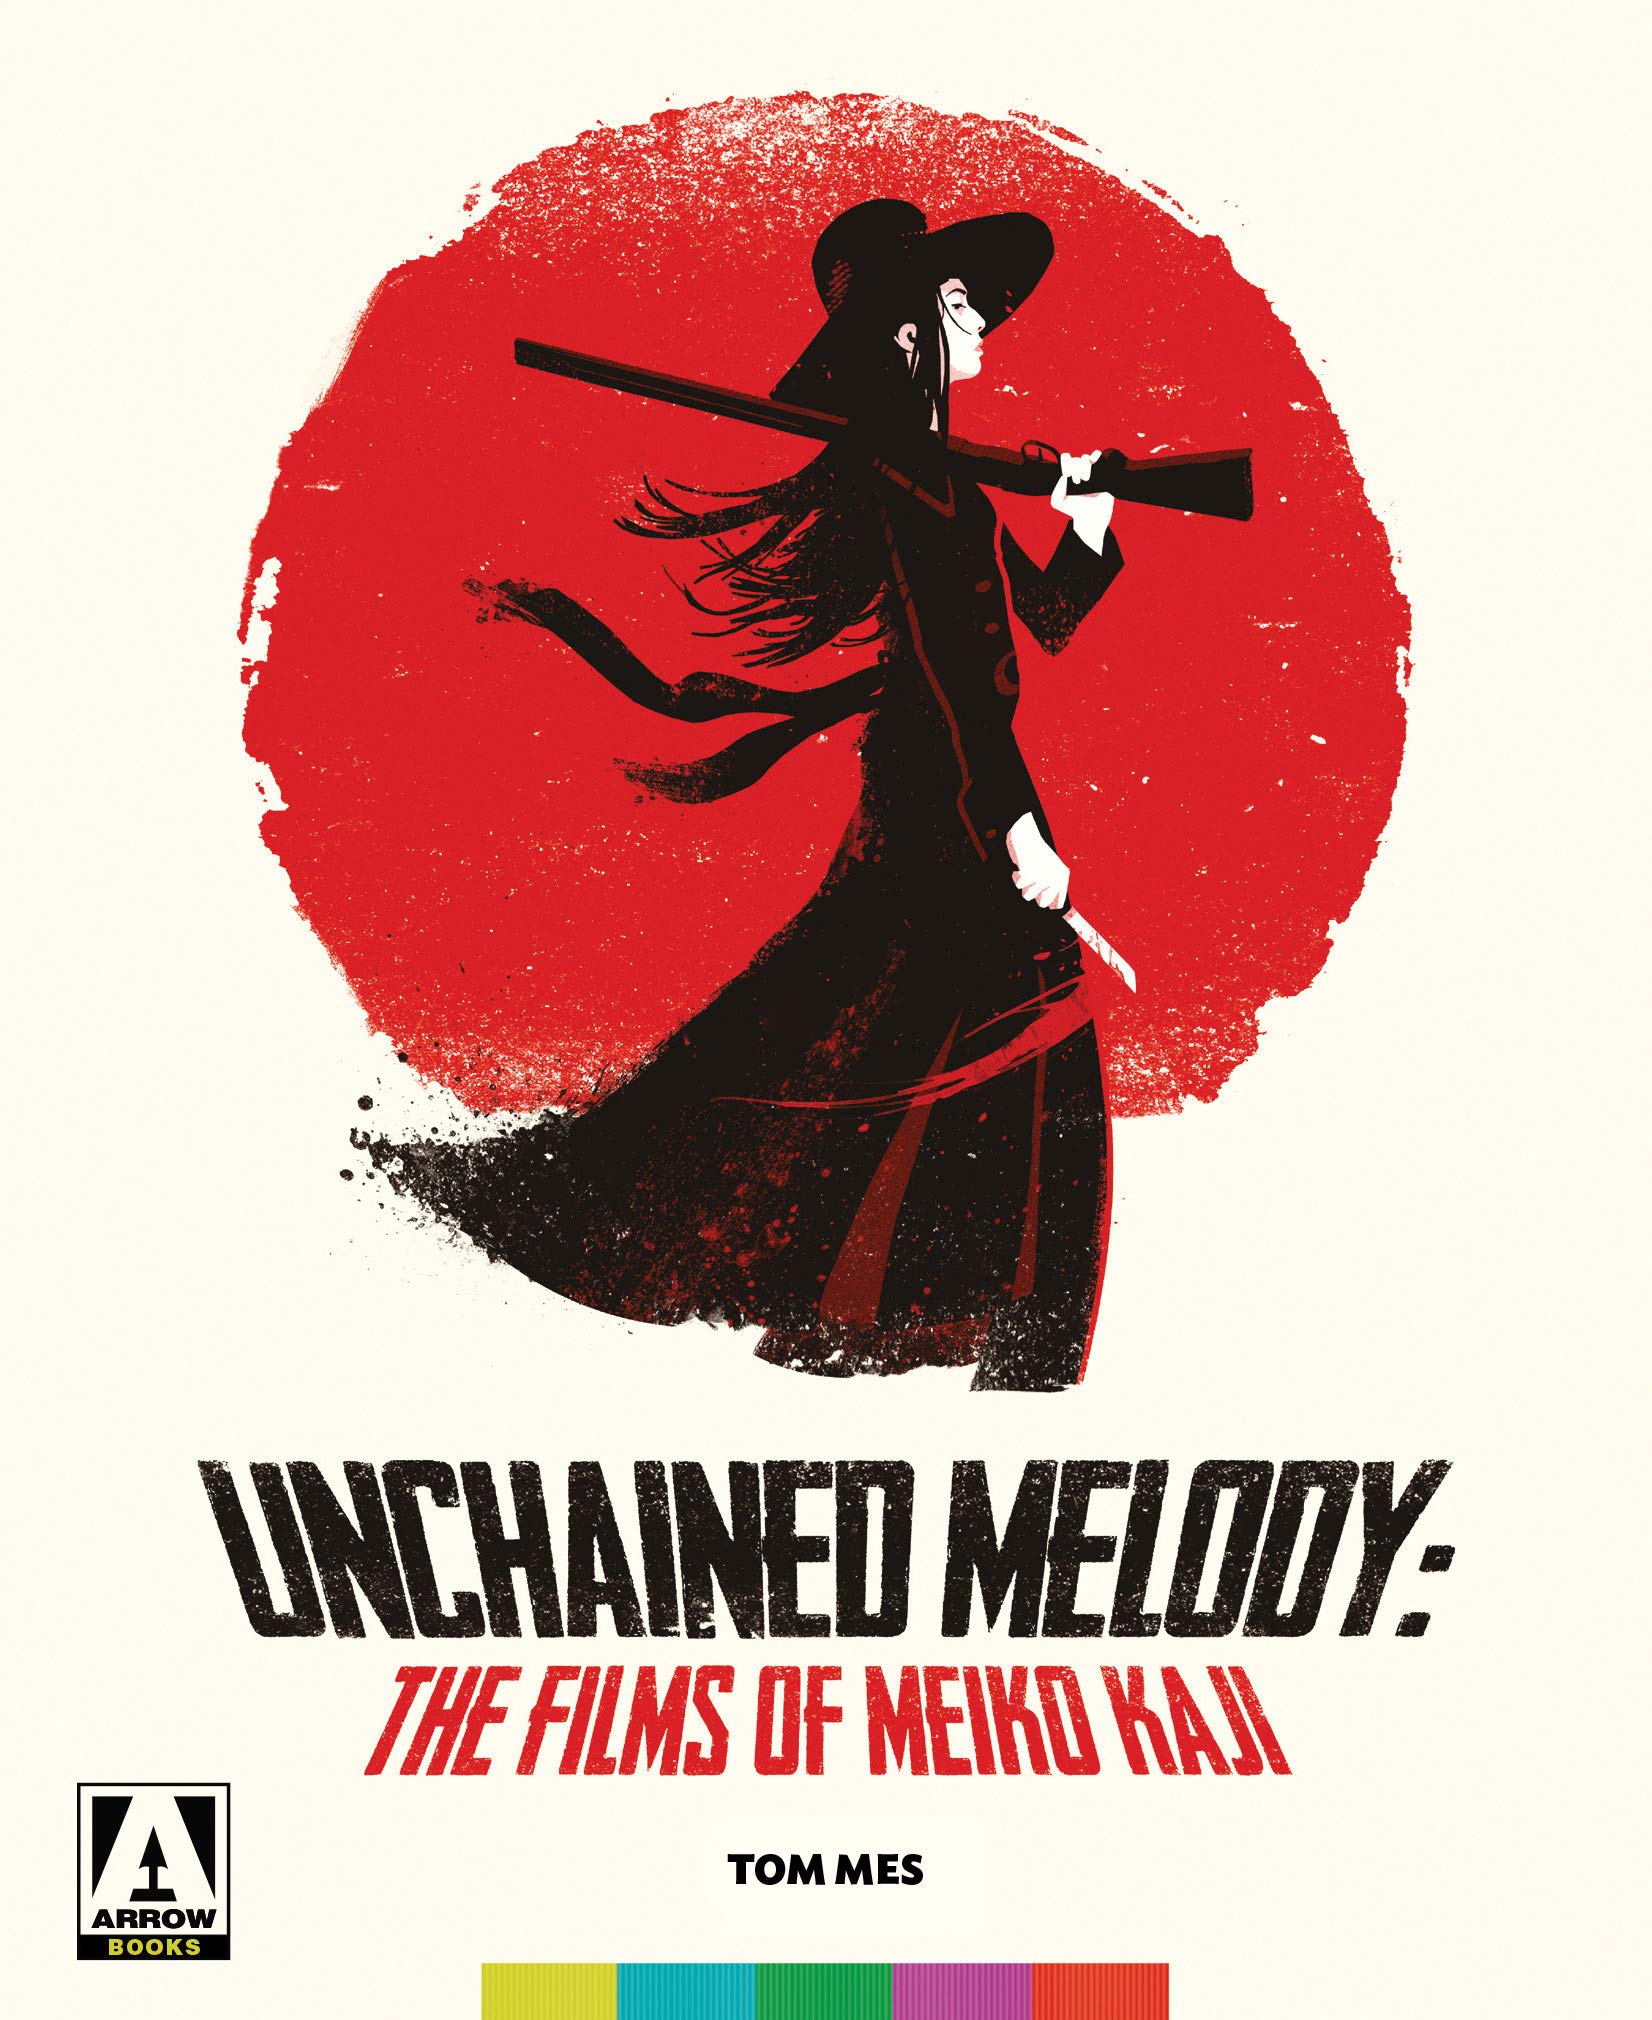 UNCHAINED MELODY: THE FILMS OF MEIKO KAJI BOOK